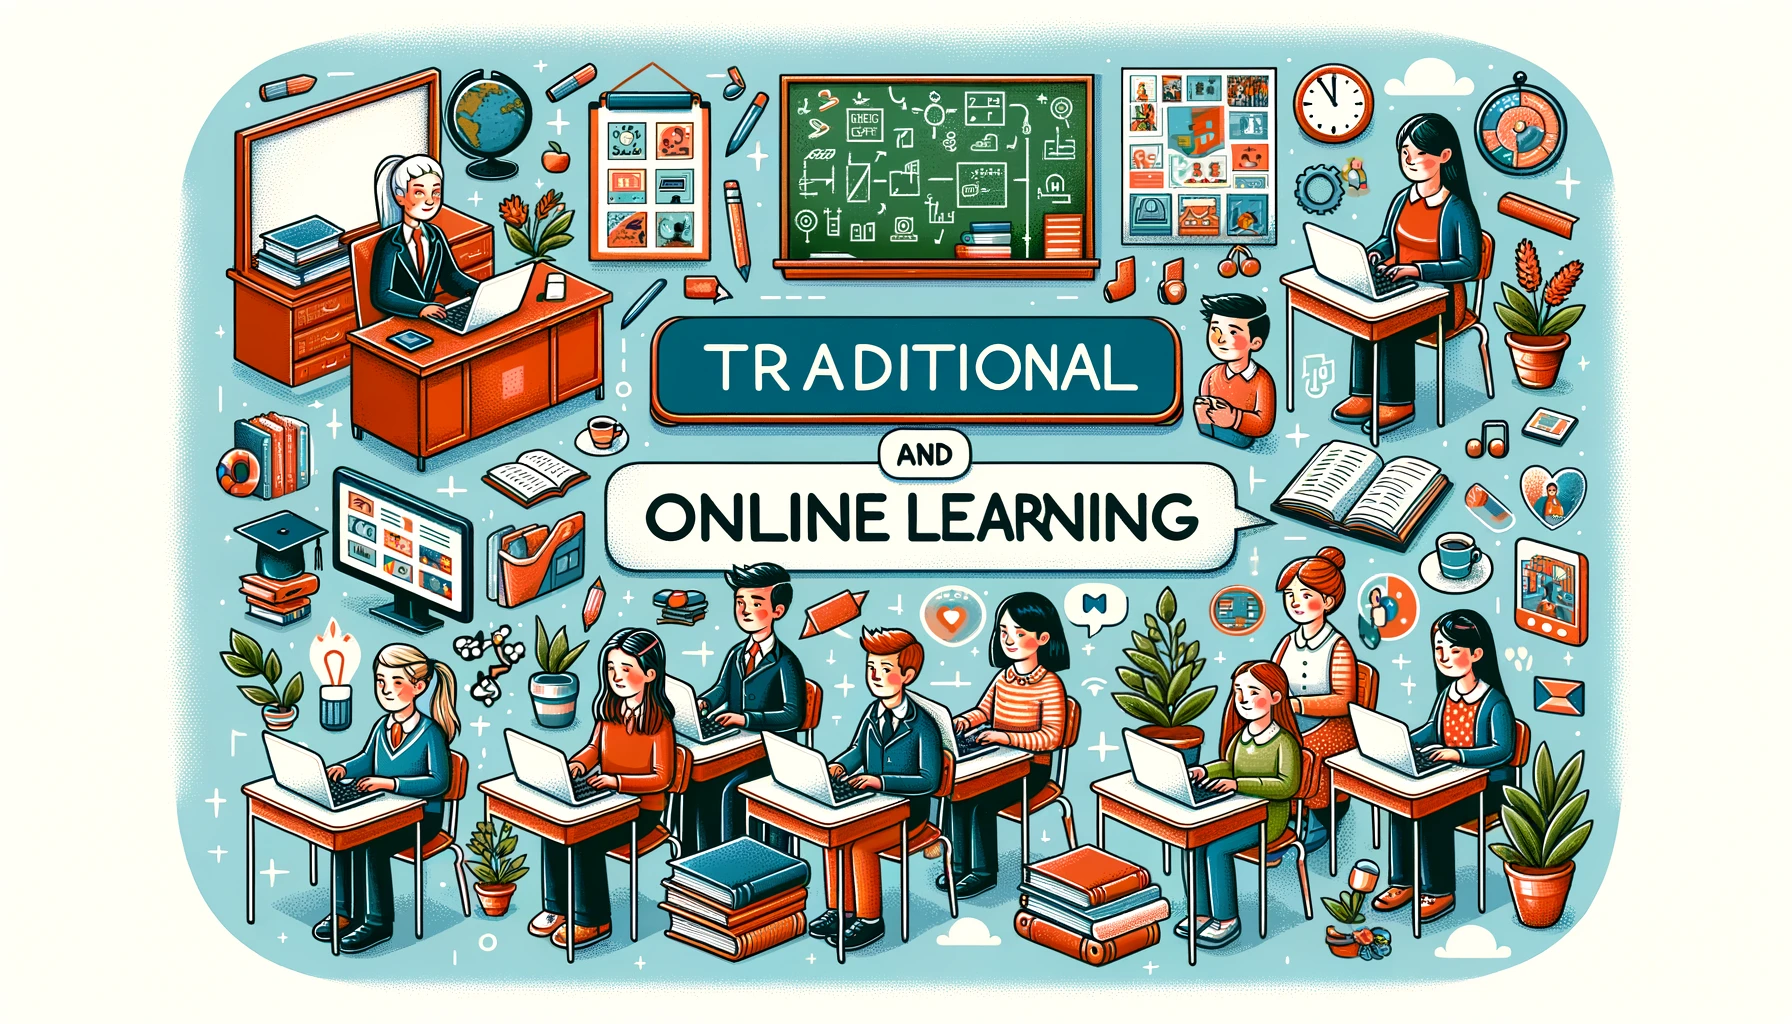 Traditional learning and online education niche ideas